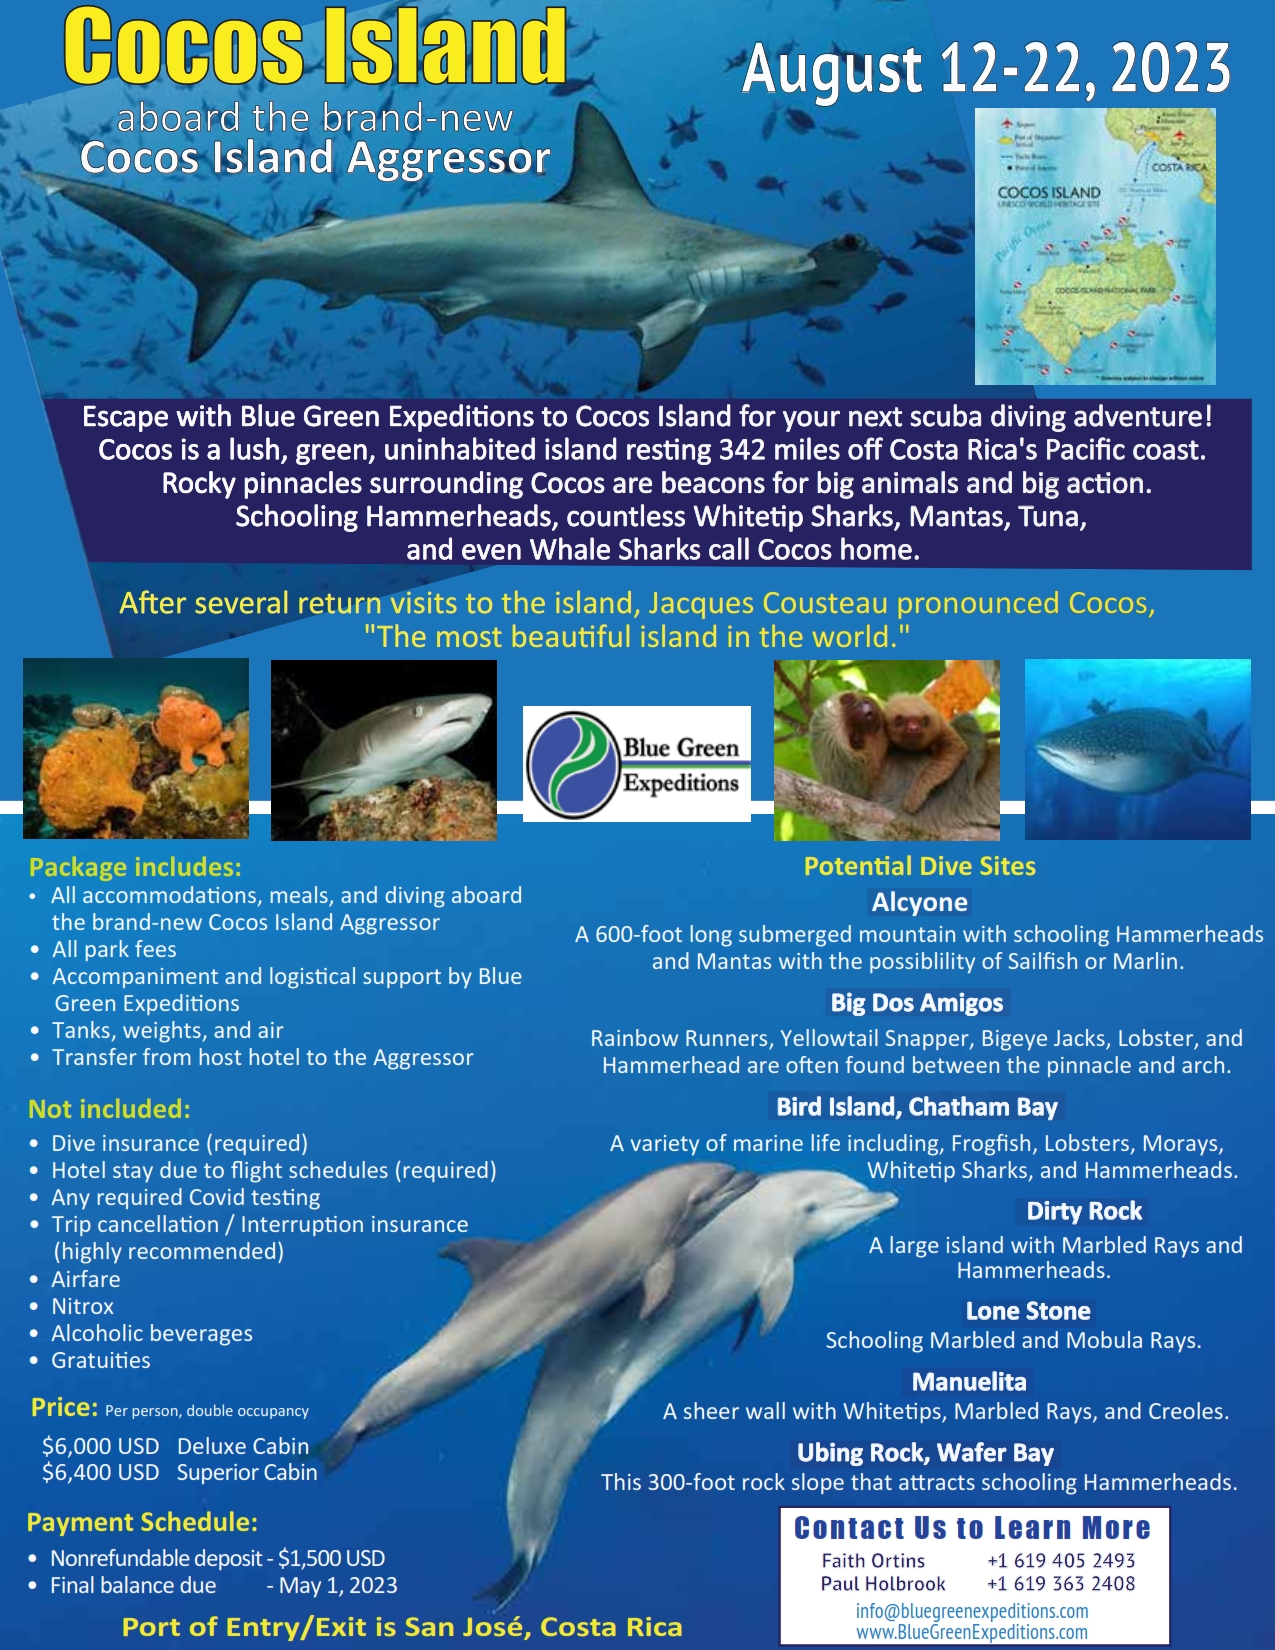 Cocos Island, August 12 - 22, 2023, expedition description and pricing. PDF flyer contains the same information.